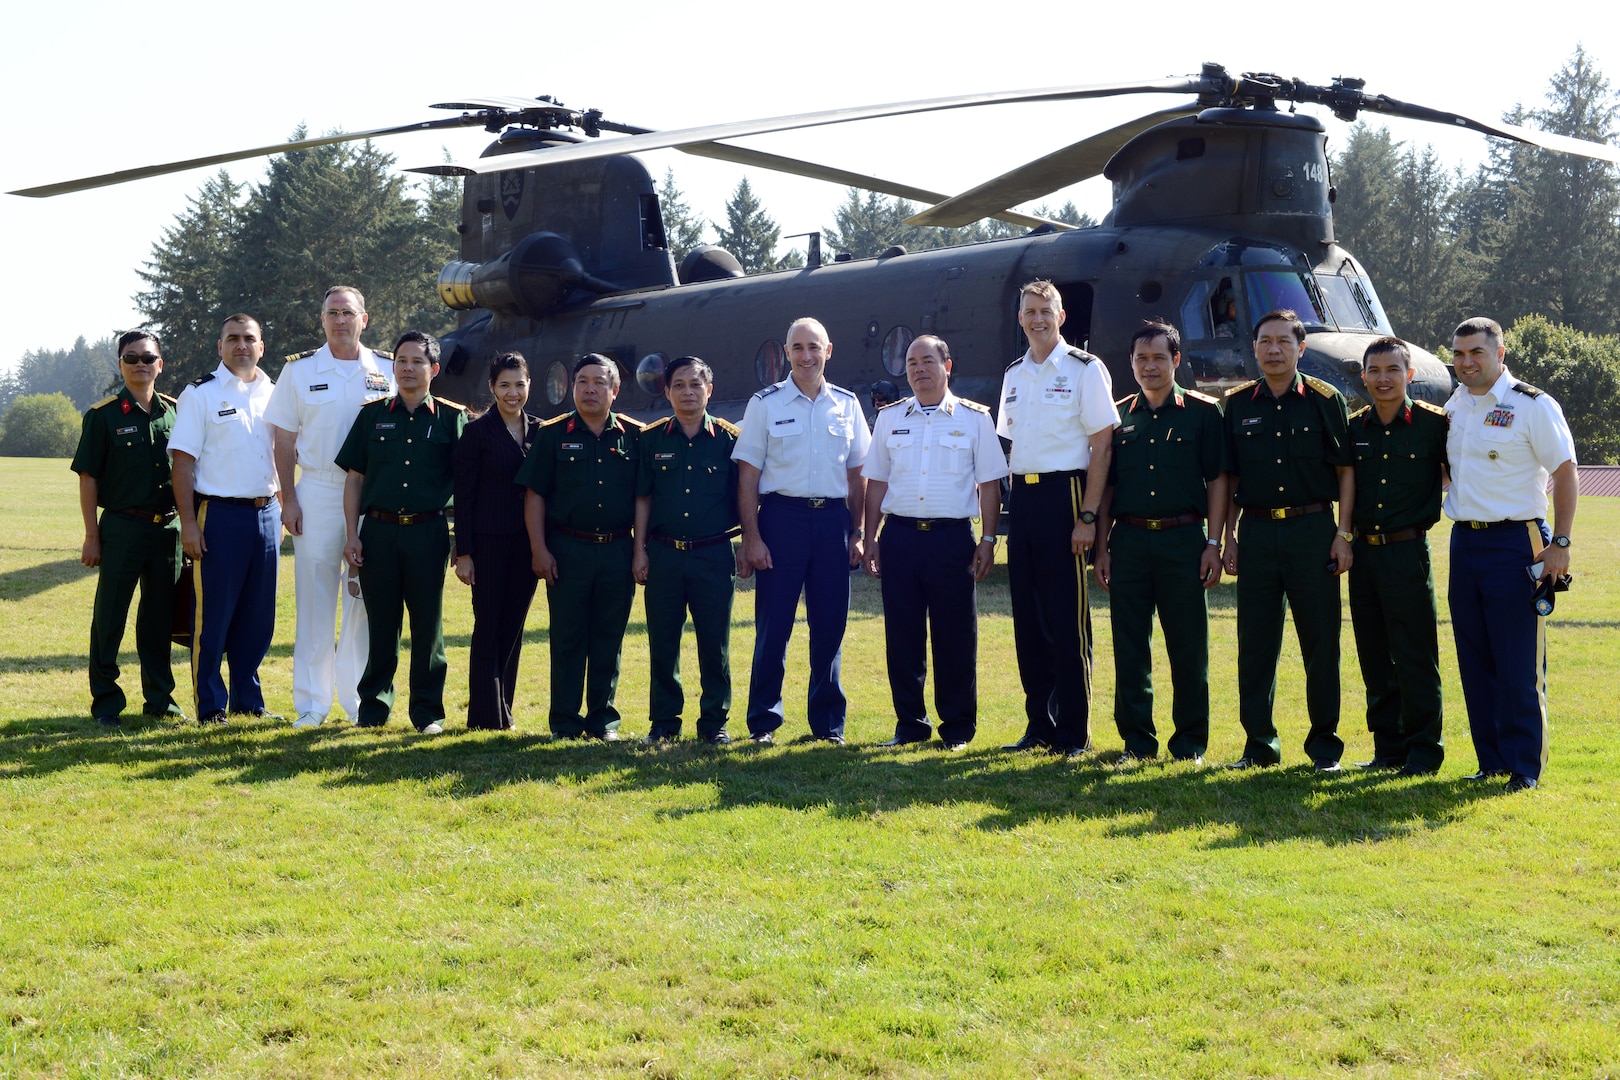 Vice Admiral Pham Ngoc Minh (center), Deputy Chief of General Staff of Vietnam People’s Army and Vice Standing Chairman of Vietnam’s National Committee for Search and Rescue (VINASARCOM), and other visitors with the VINASARCOM delegation pose for a group photo with their hosts, Maj. Gen. Daniel Hokanson (on Minh’s left), Adjutant General, Oregon, and other members of the Oregon National Guard after visiting the Oregon National Guard’s CBRNE Enhanced Response Force Package (CERFP) annual certification training exercise, Aug. 25, at Camp Rilea in Warrenton, Ore. 